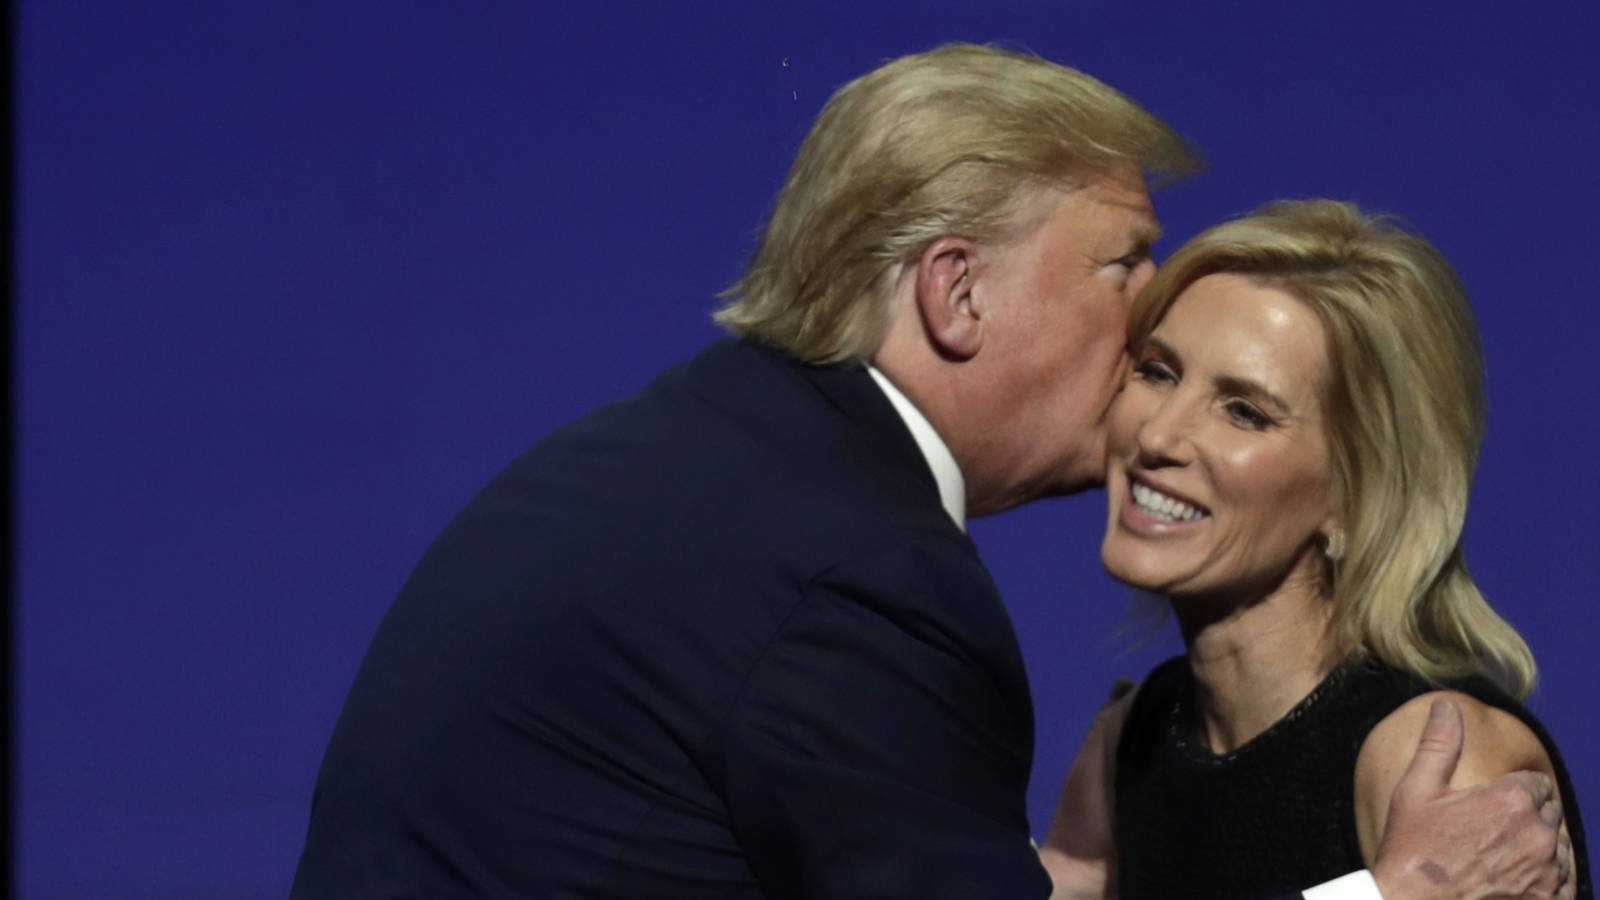 President Donald Trump gives Laura Ingraham a kiss after inviting her on stage during the Turning Point USA Student Action Summit at the Palm Beach County Convention Center, Saturday, Dec. 21, 2019. (c) Sipa AP22410913_000020